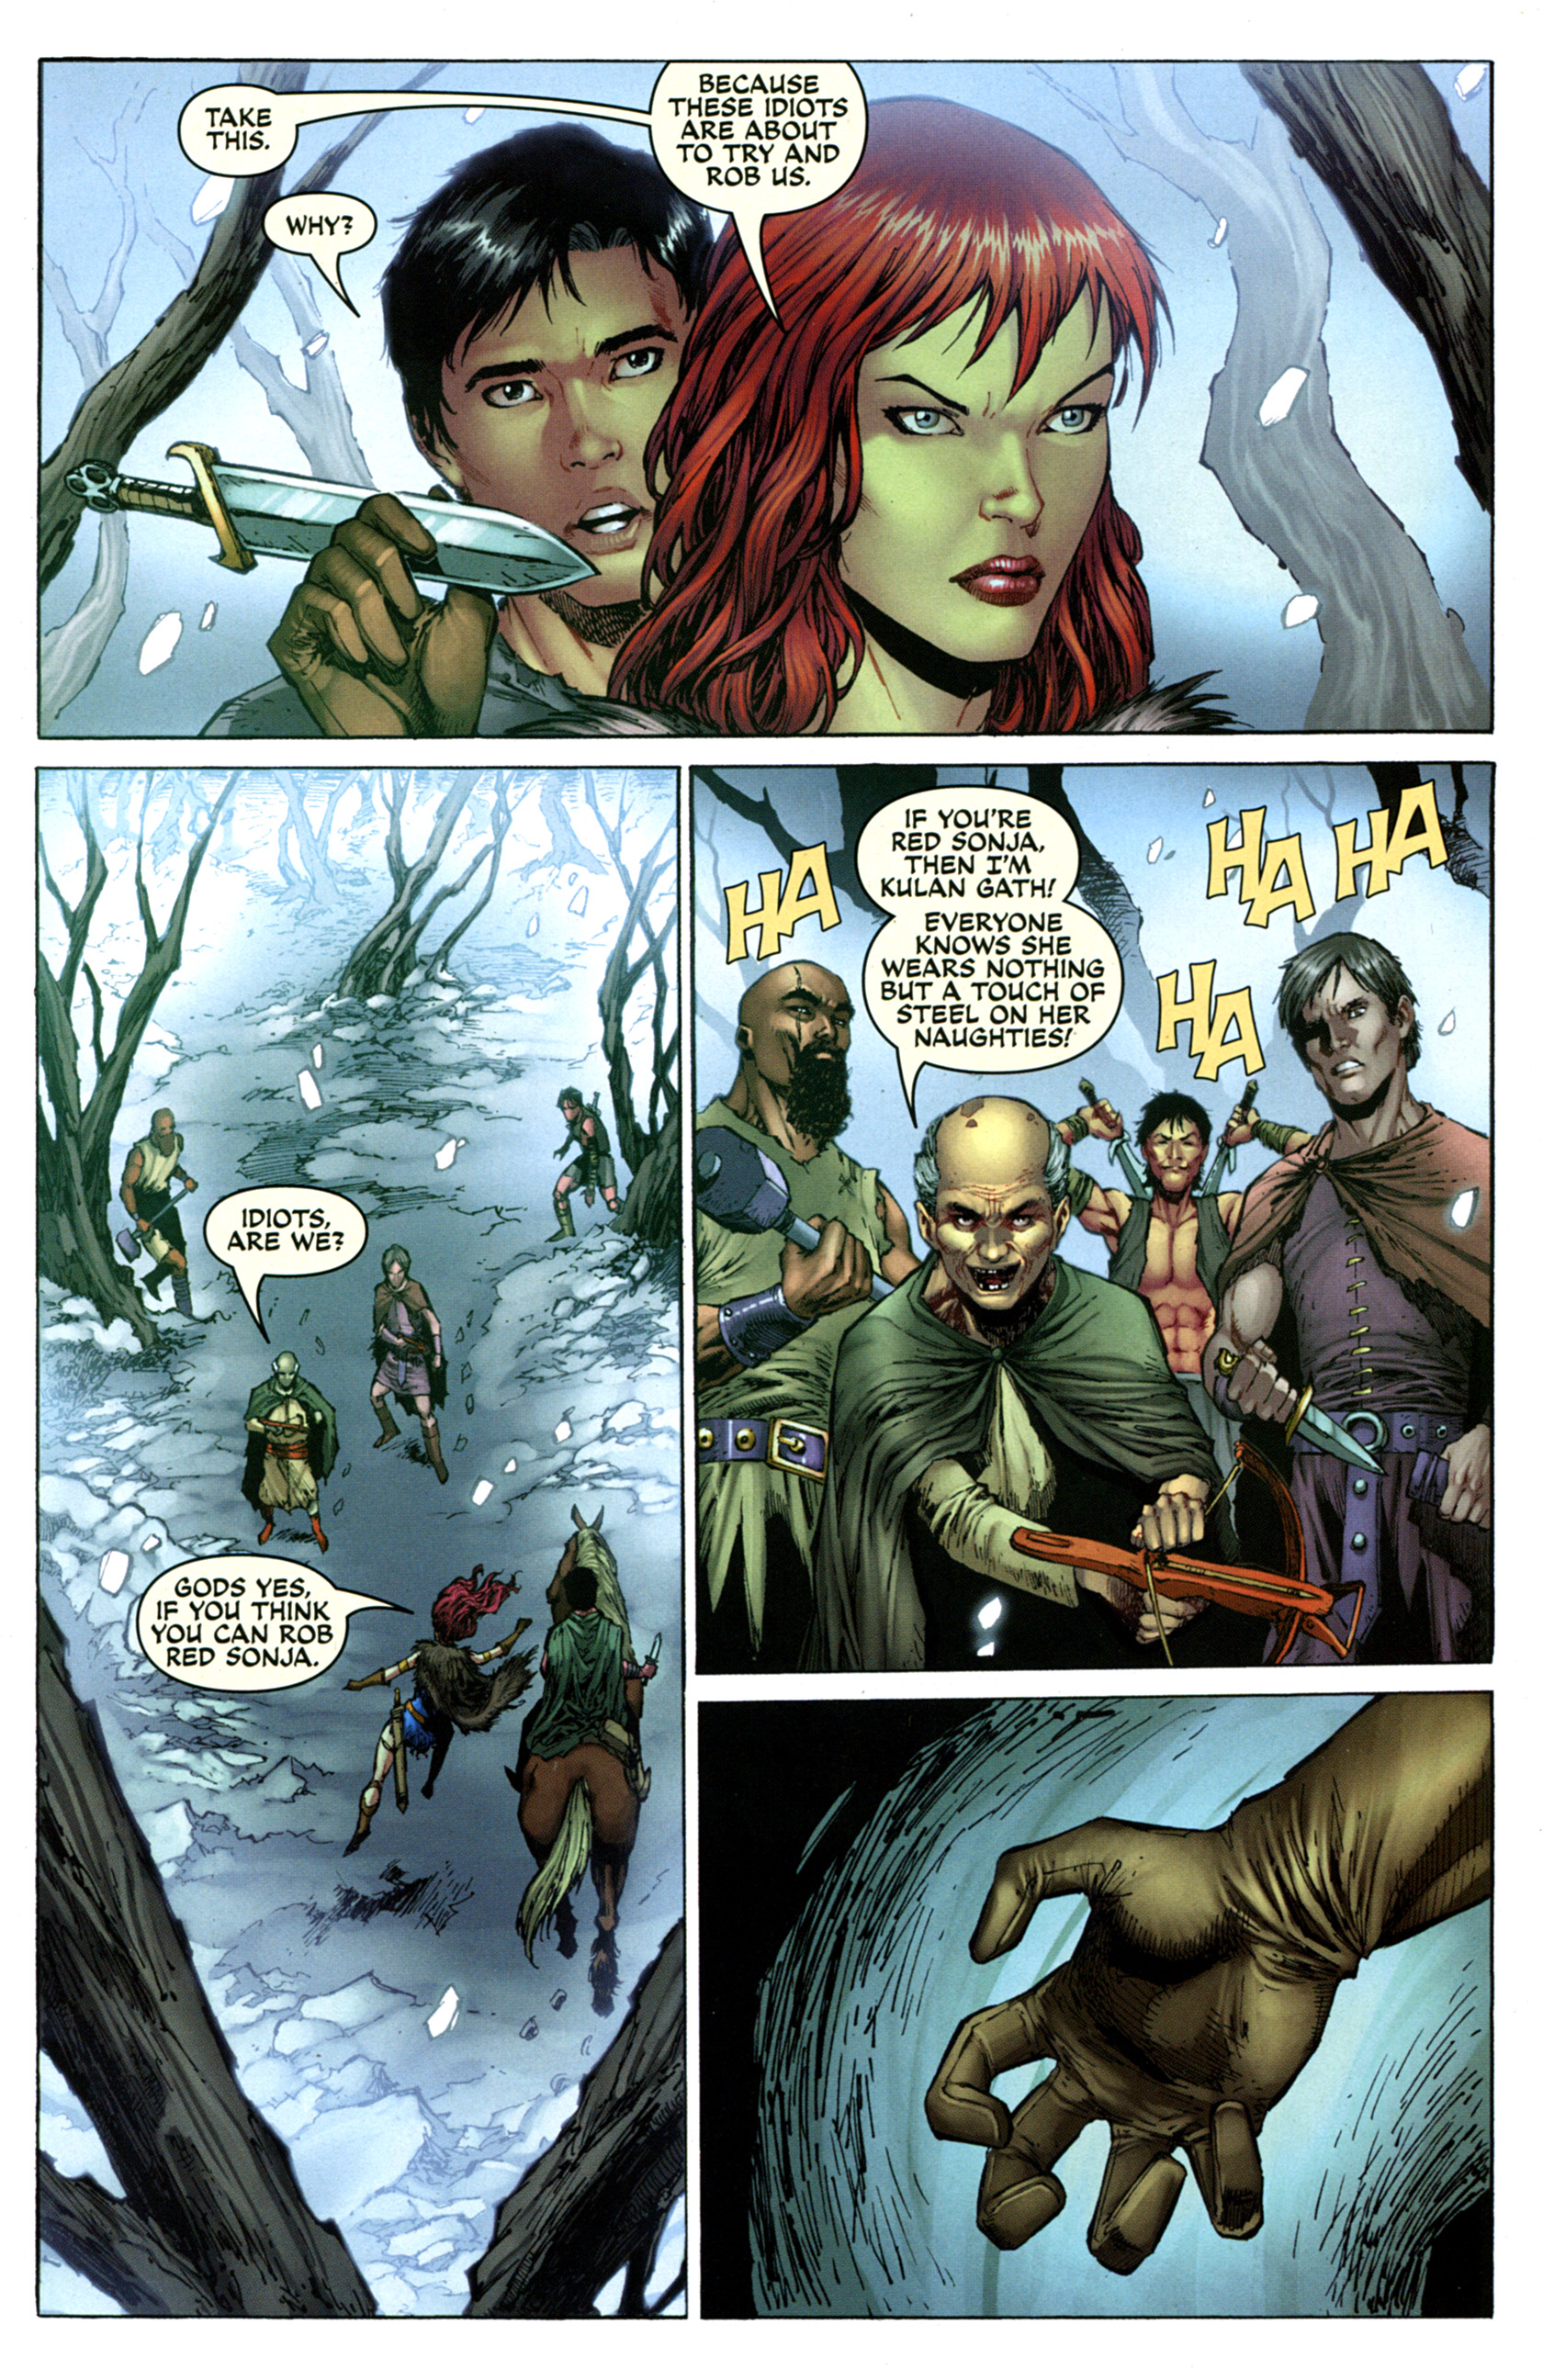 Read online Red Sonja: Blue comic -  Issue # Full - 24